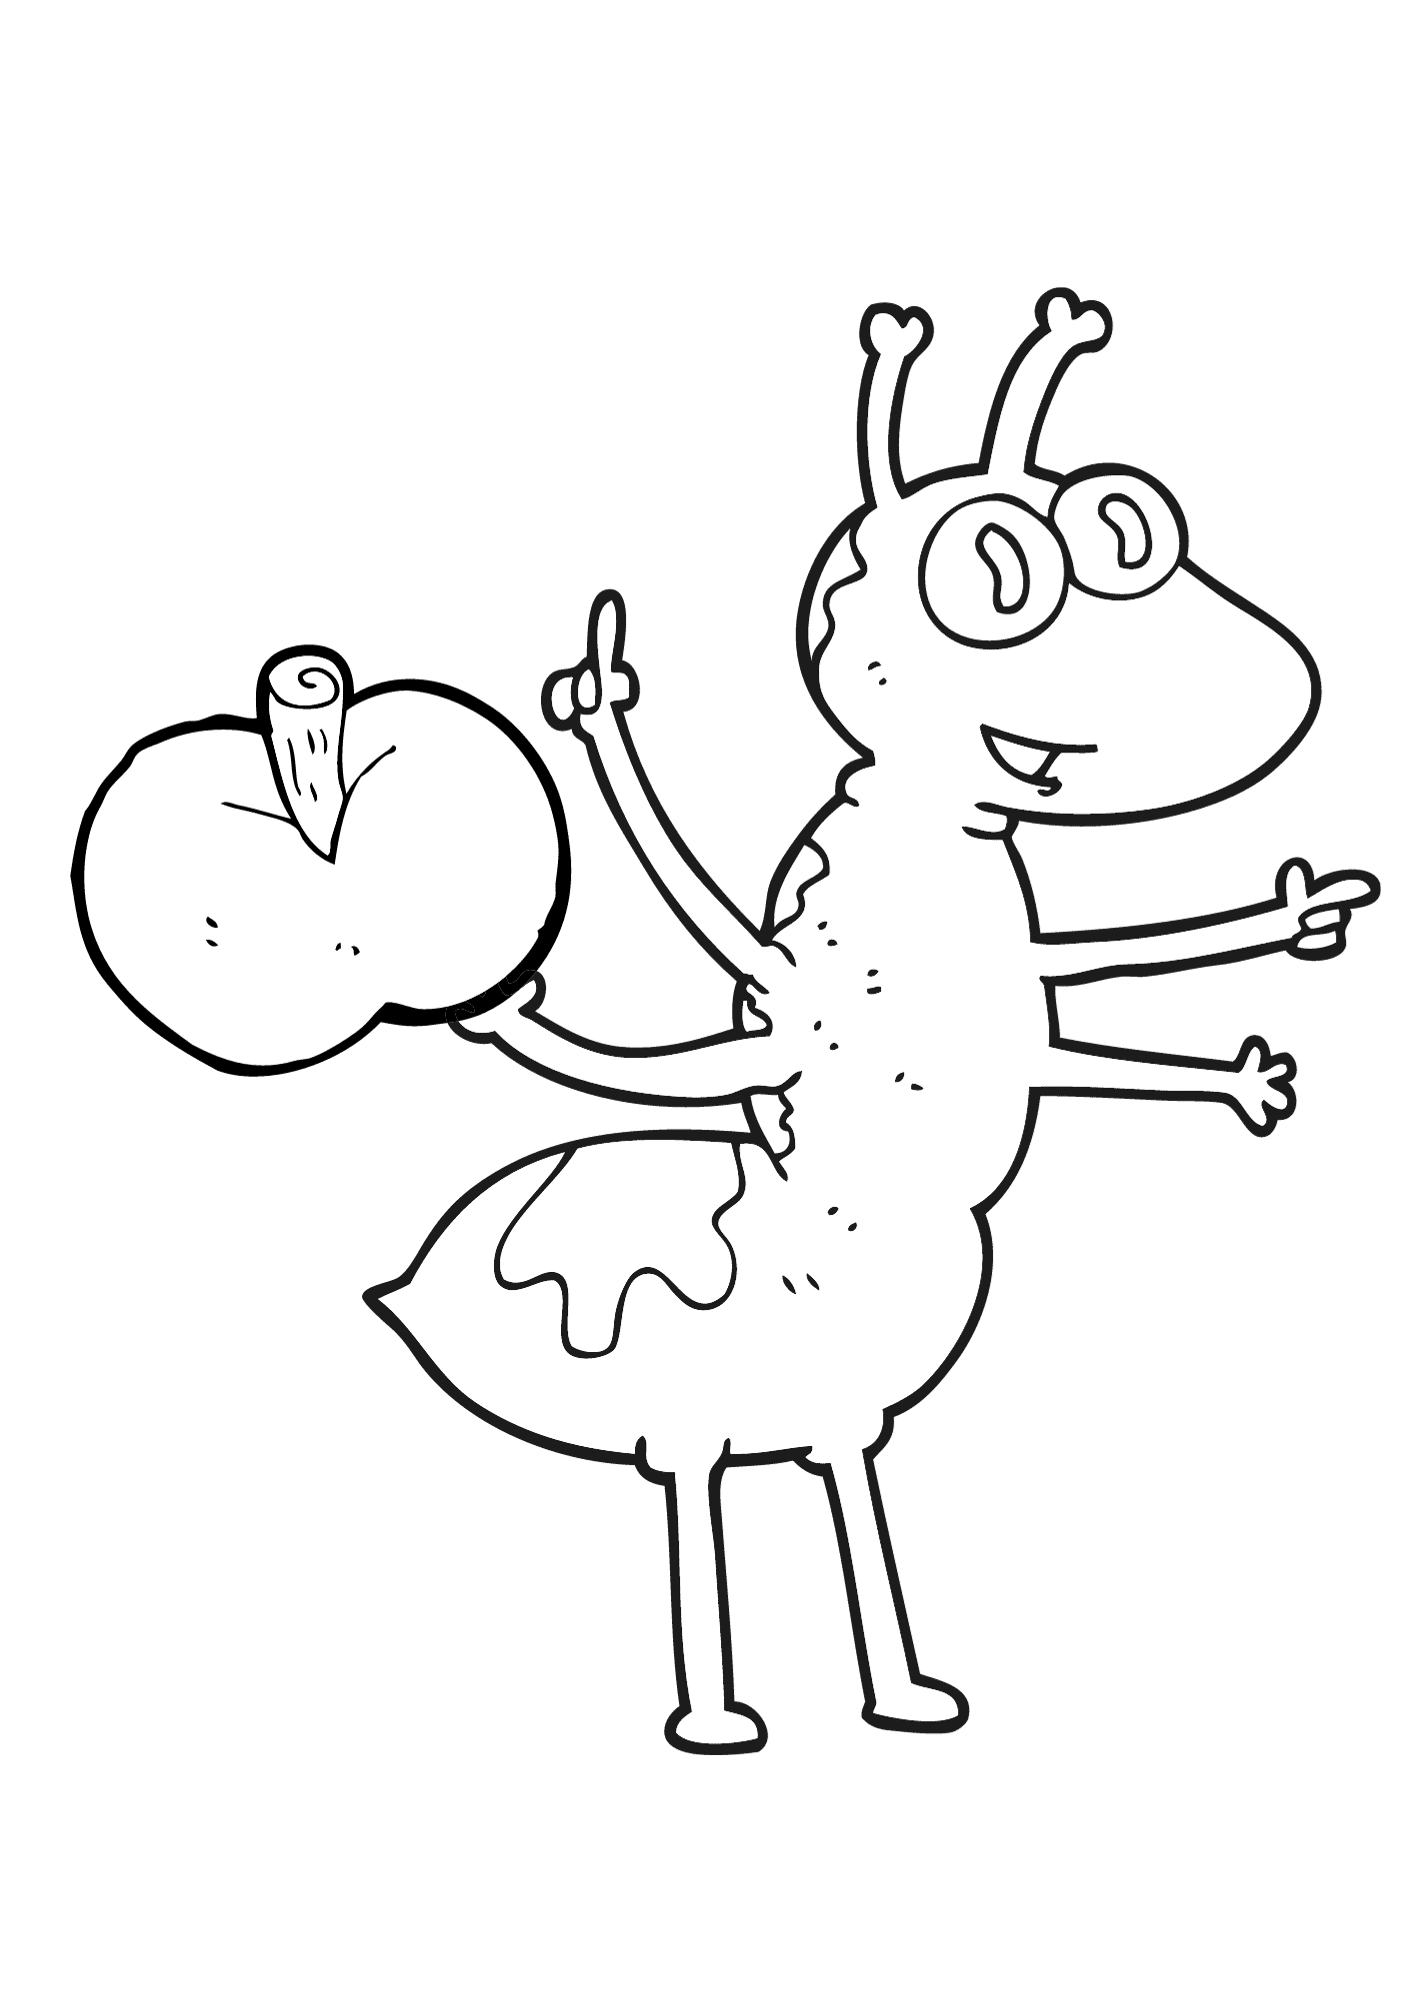 Cartoon Ant With An Apple Coloring Page